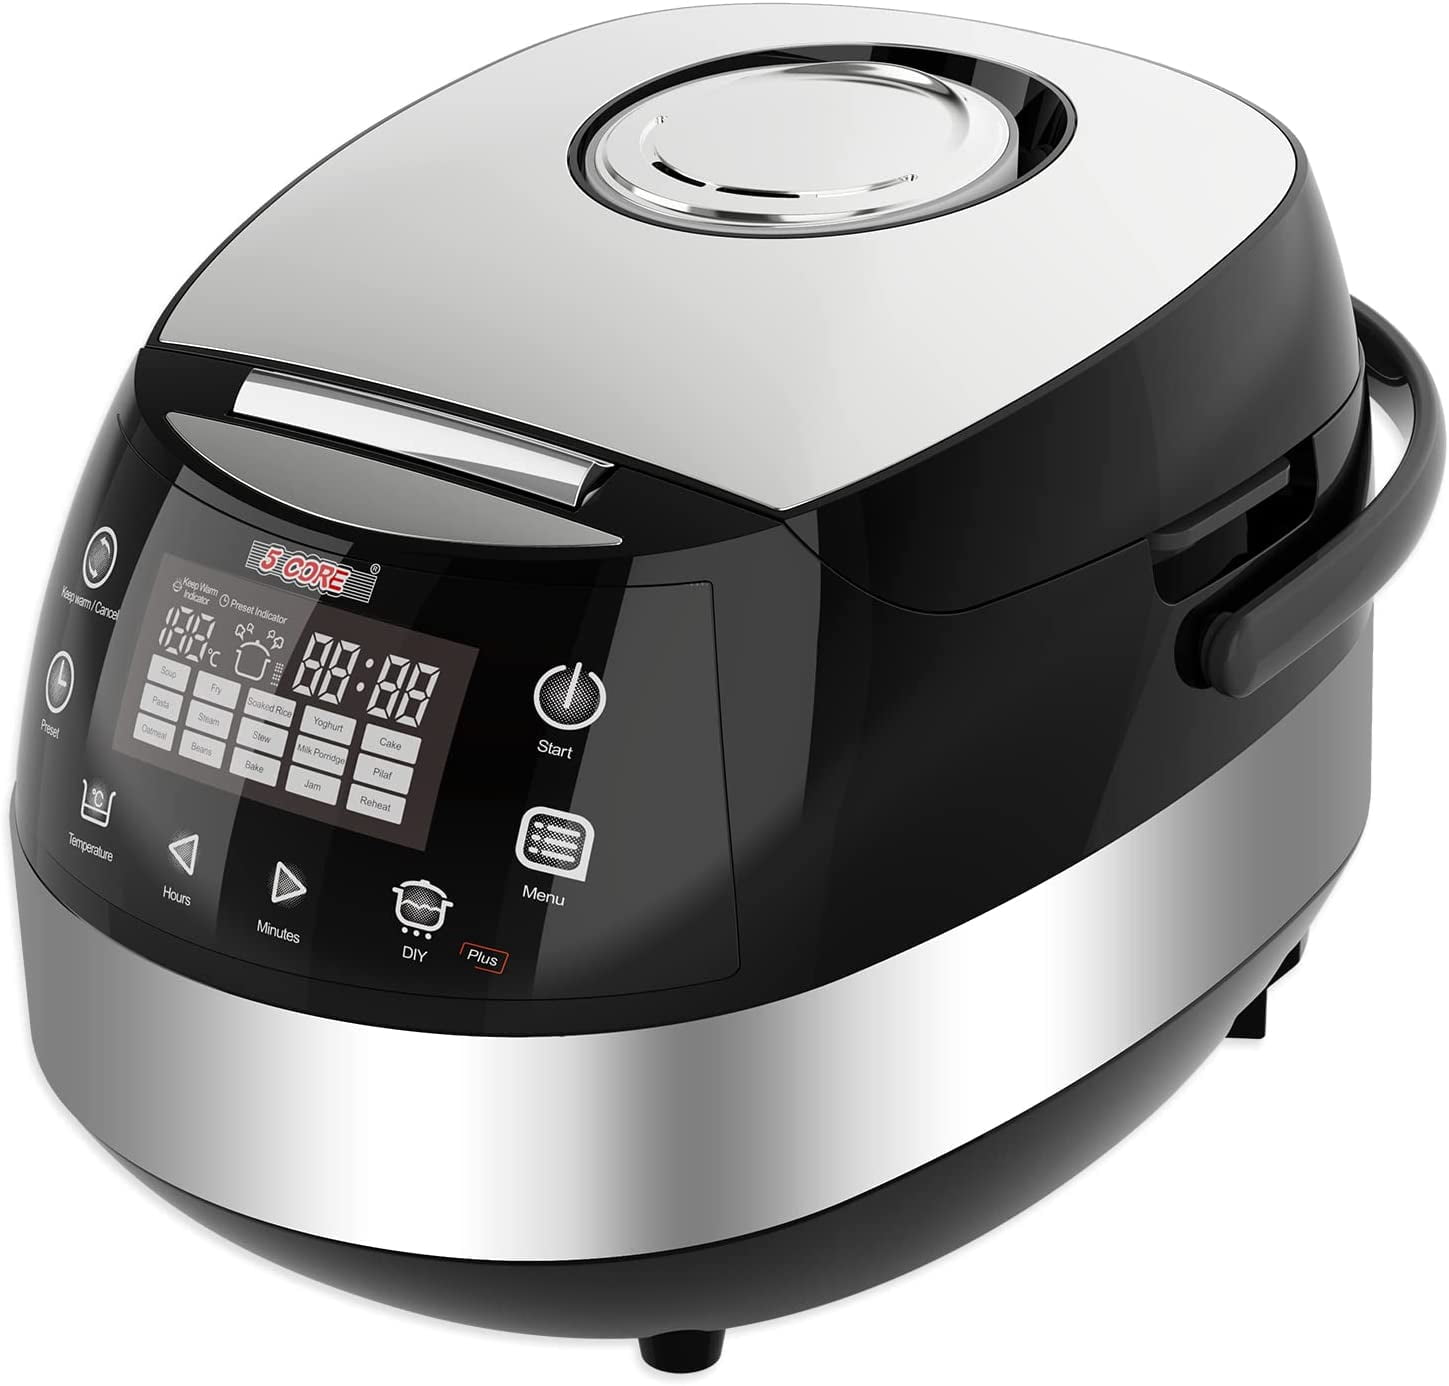 Vivarte 5-Cup Rice Cooker, Free shipping (Excluding HI, AK) – The